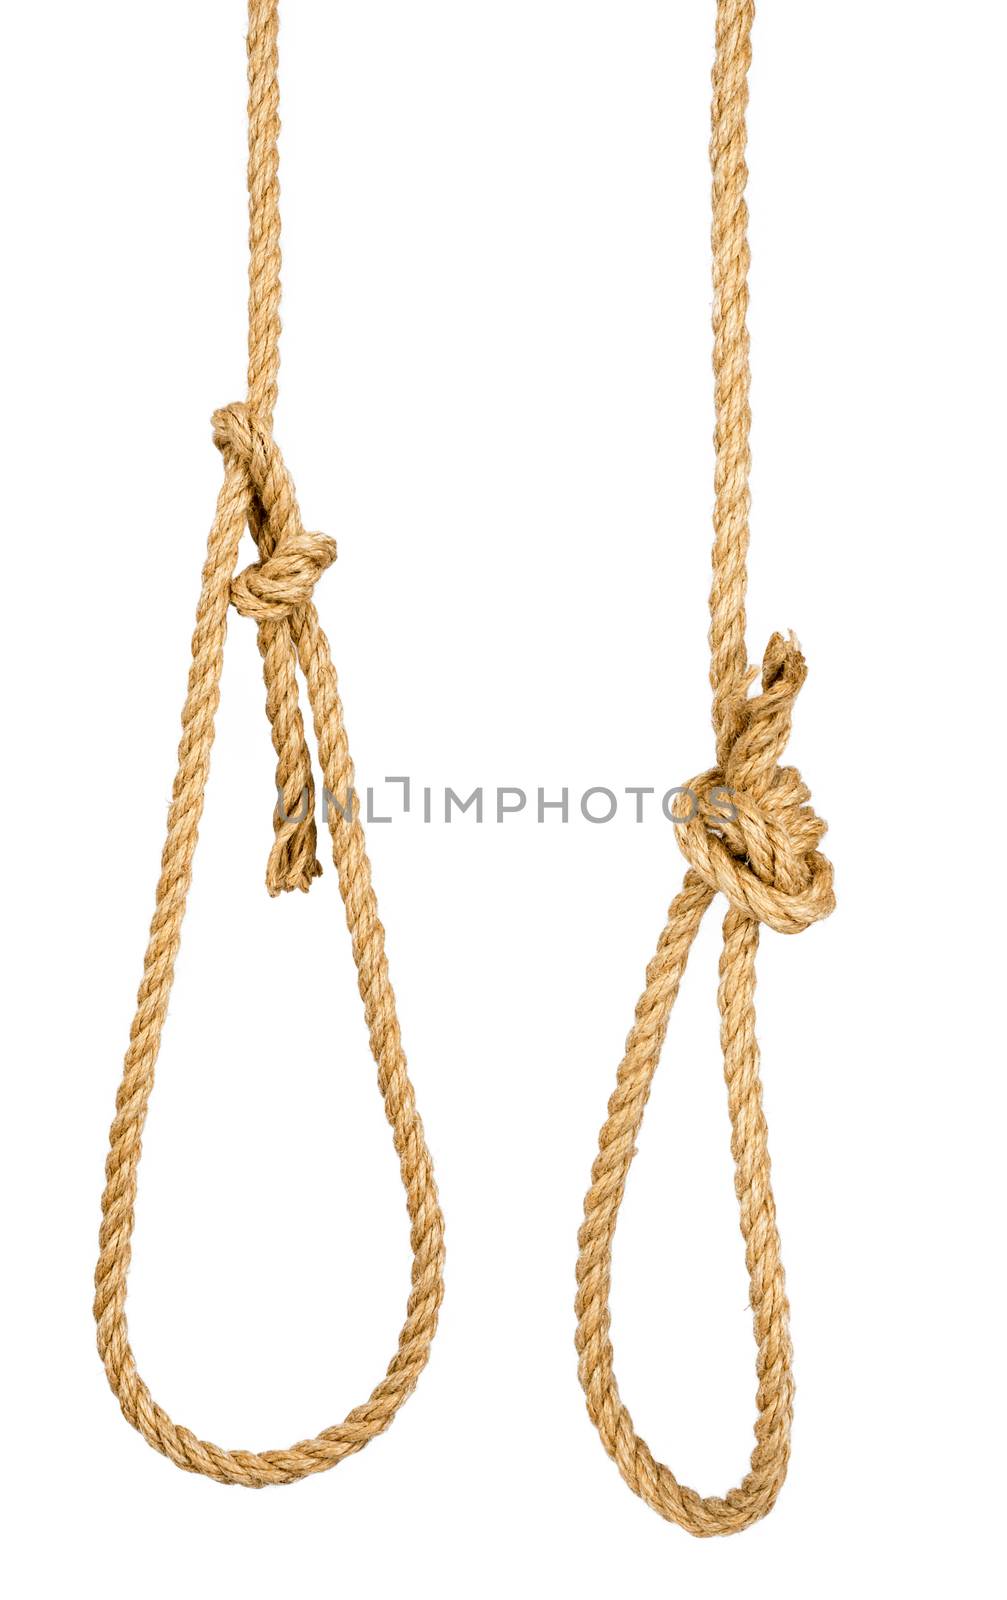 Rope loop isolated on white background by cherezoff